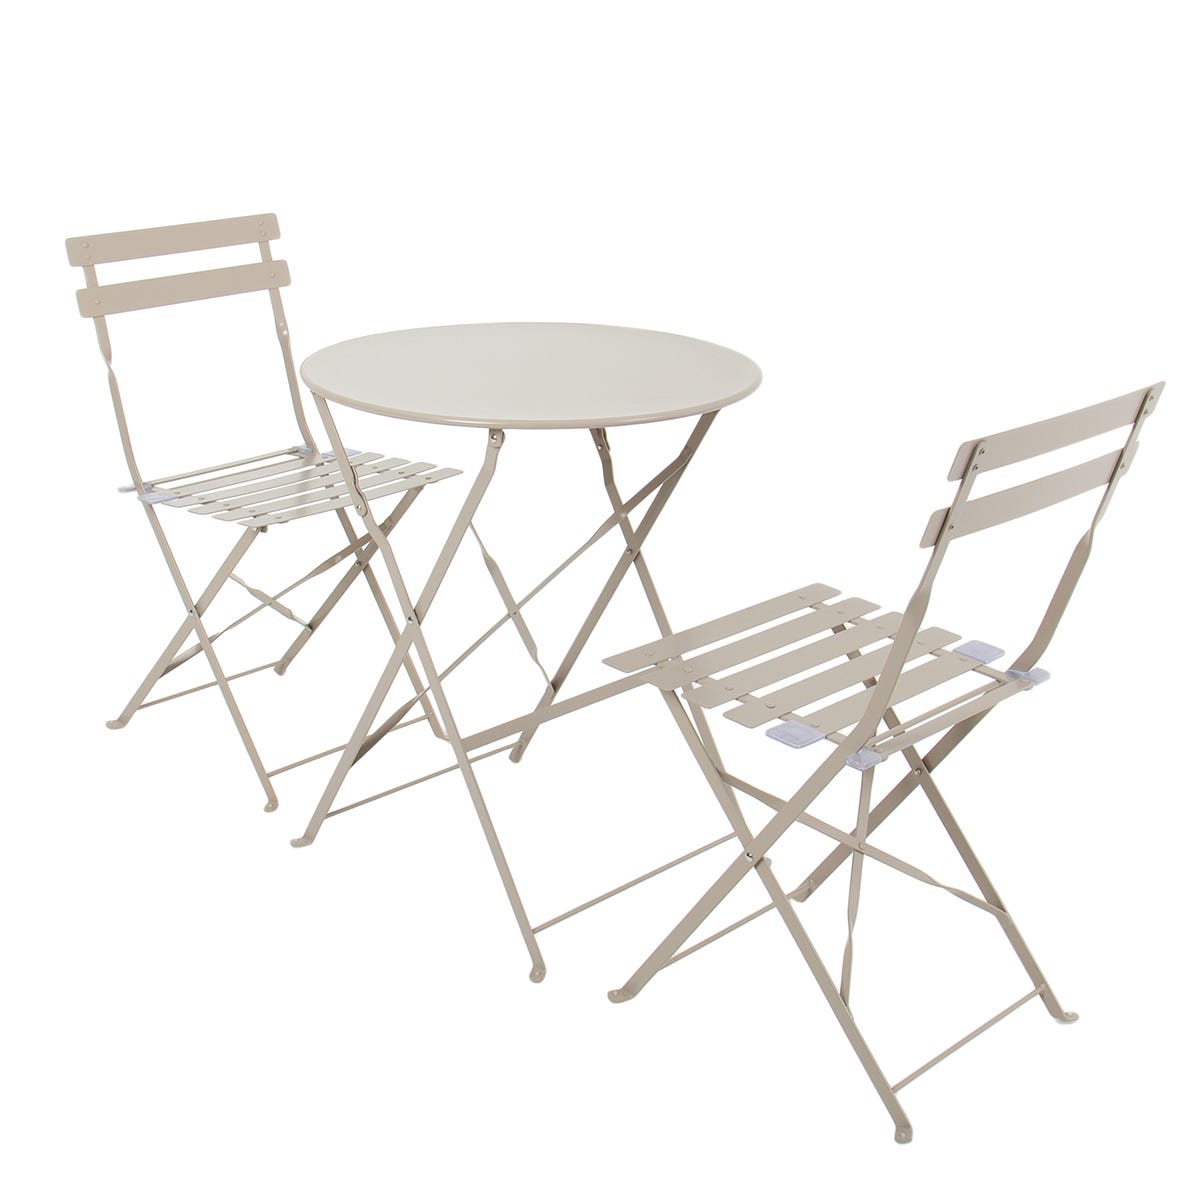 Charles Bentley 3 Piece Metal Bistro Set Garden Patio Table 2 Chairs 6 Colours Taupe